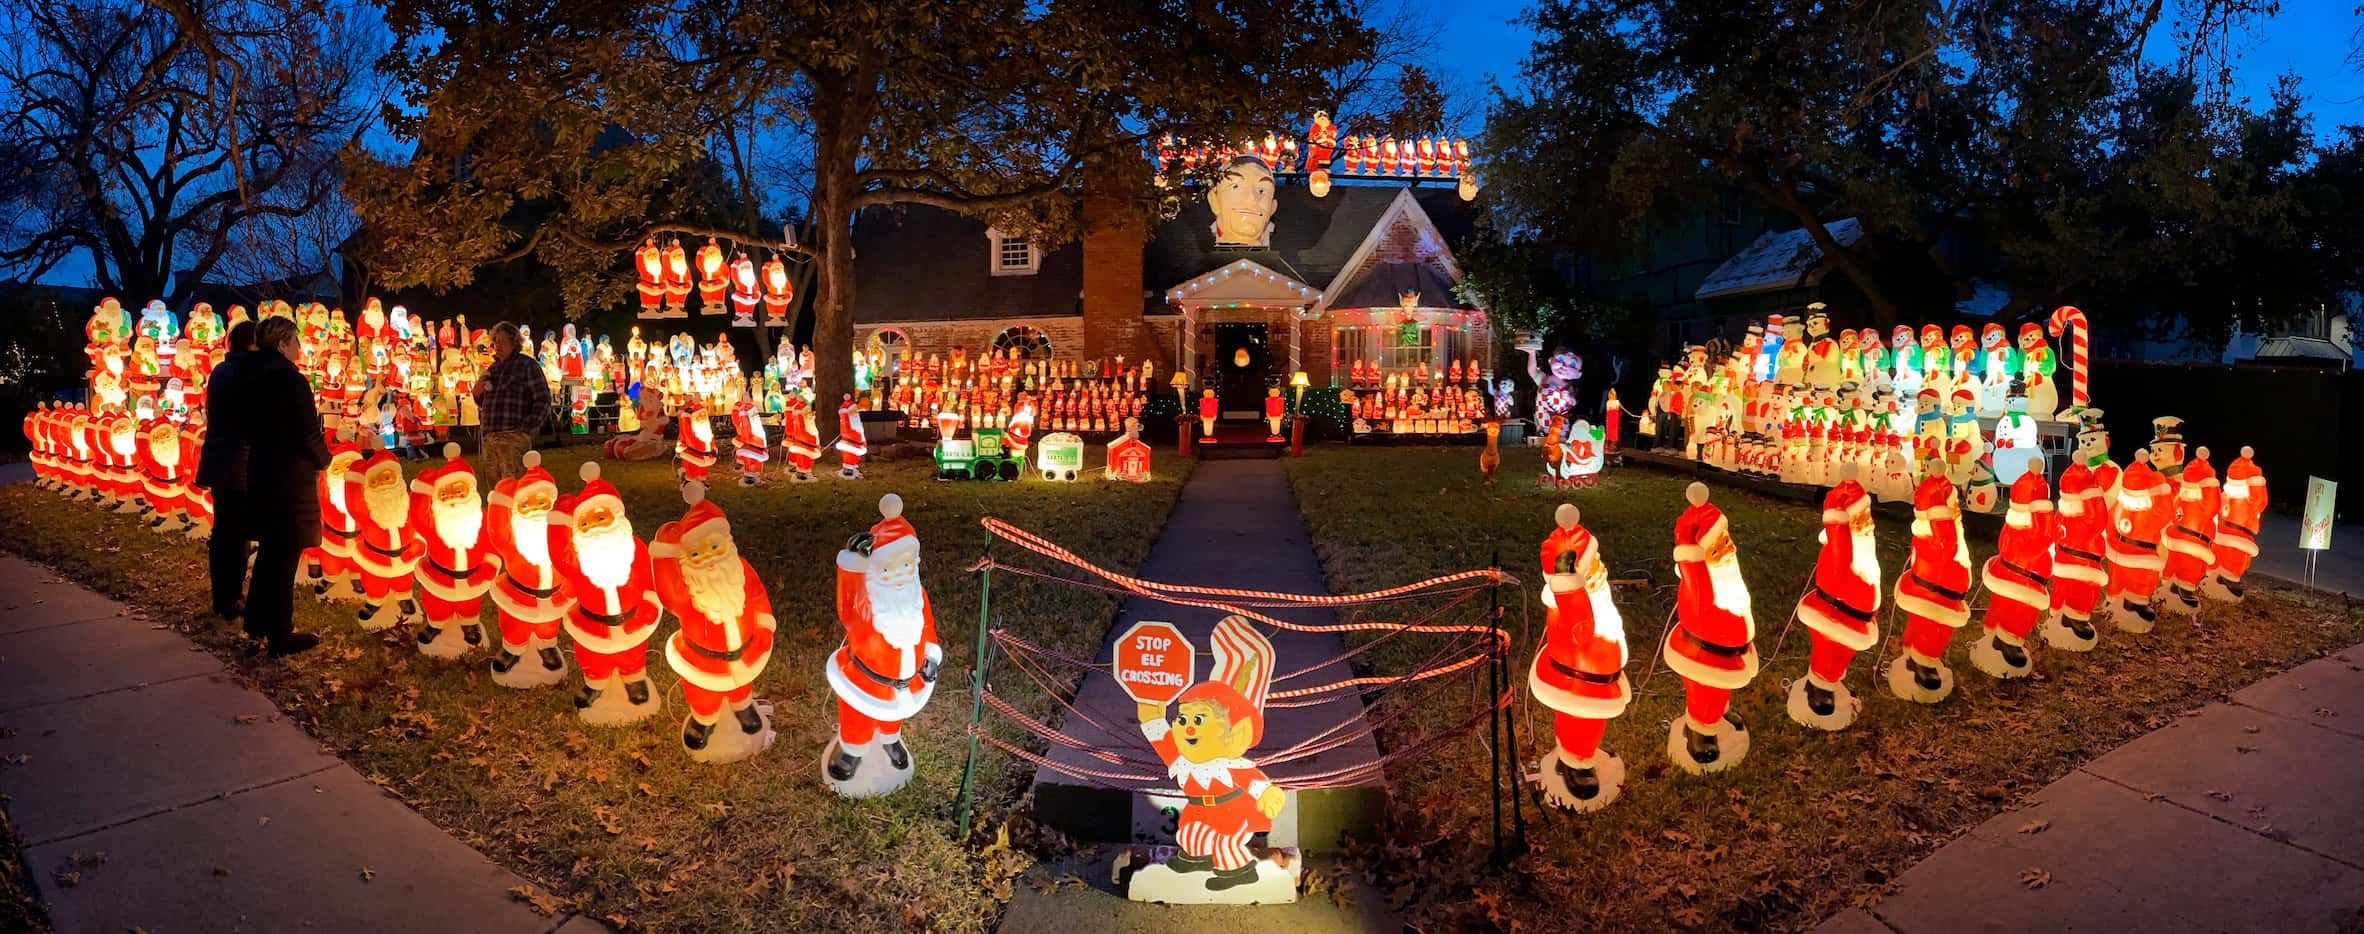 This panoramic view shows the full holiday scene of Wayne Smith's house and yard.